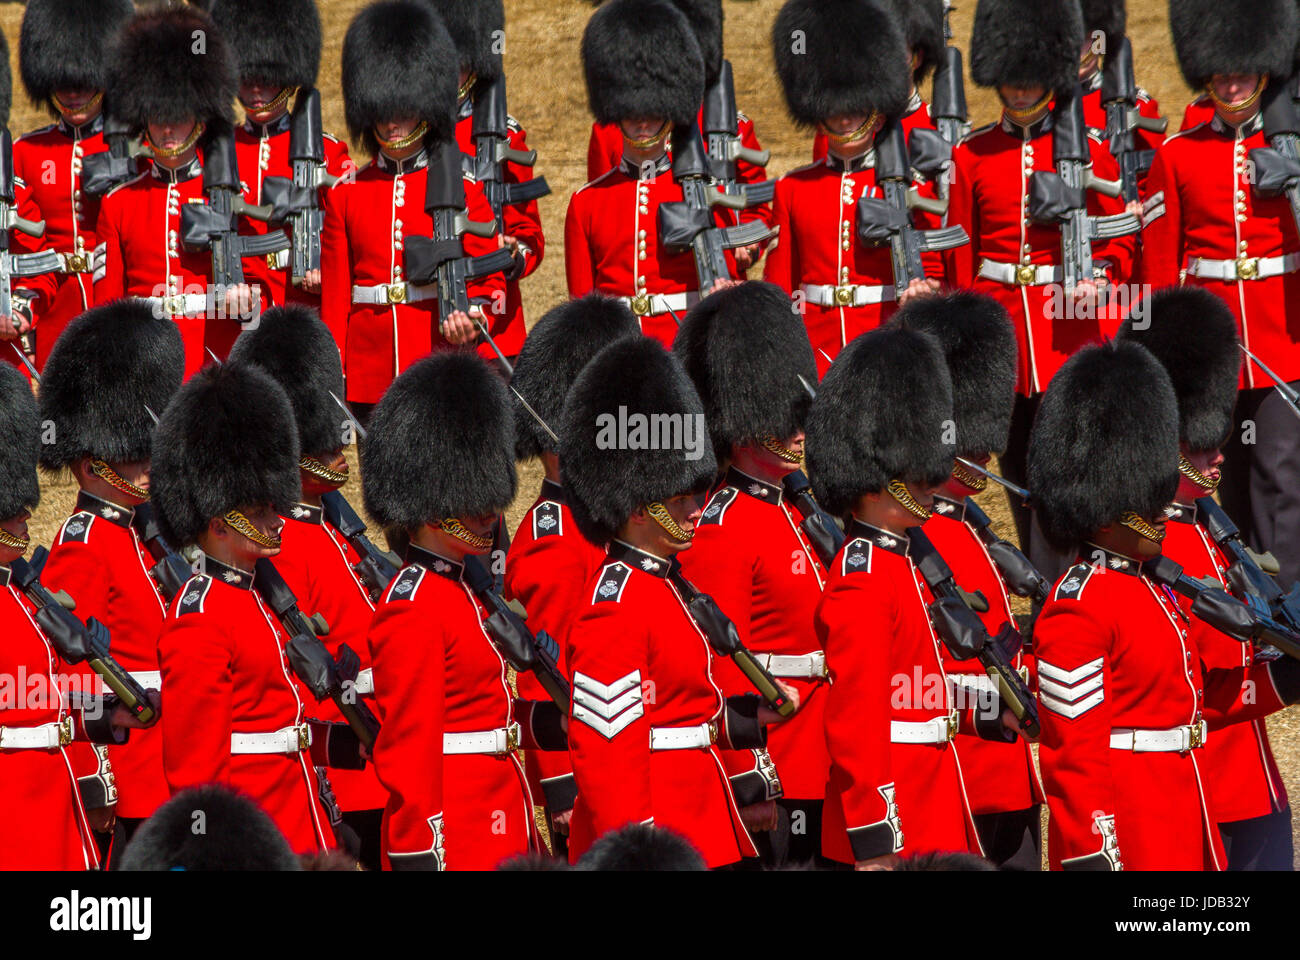 Soldiers of The Grenadier Guards marching at Trooping The Colour or Queens Birthday Parade at Horse Guards Parade, London, UK, 2017 Stock Photo